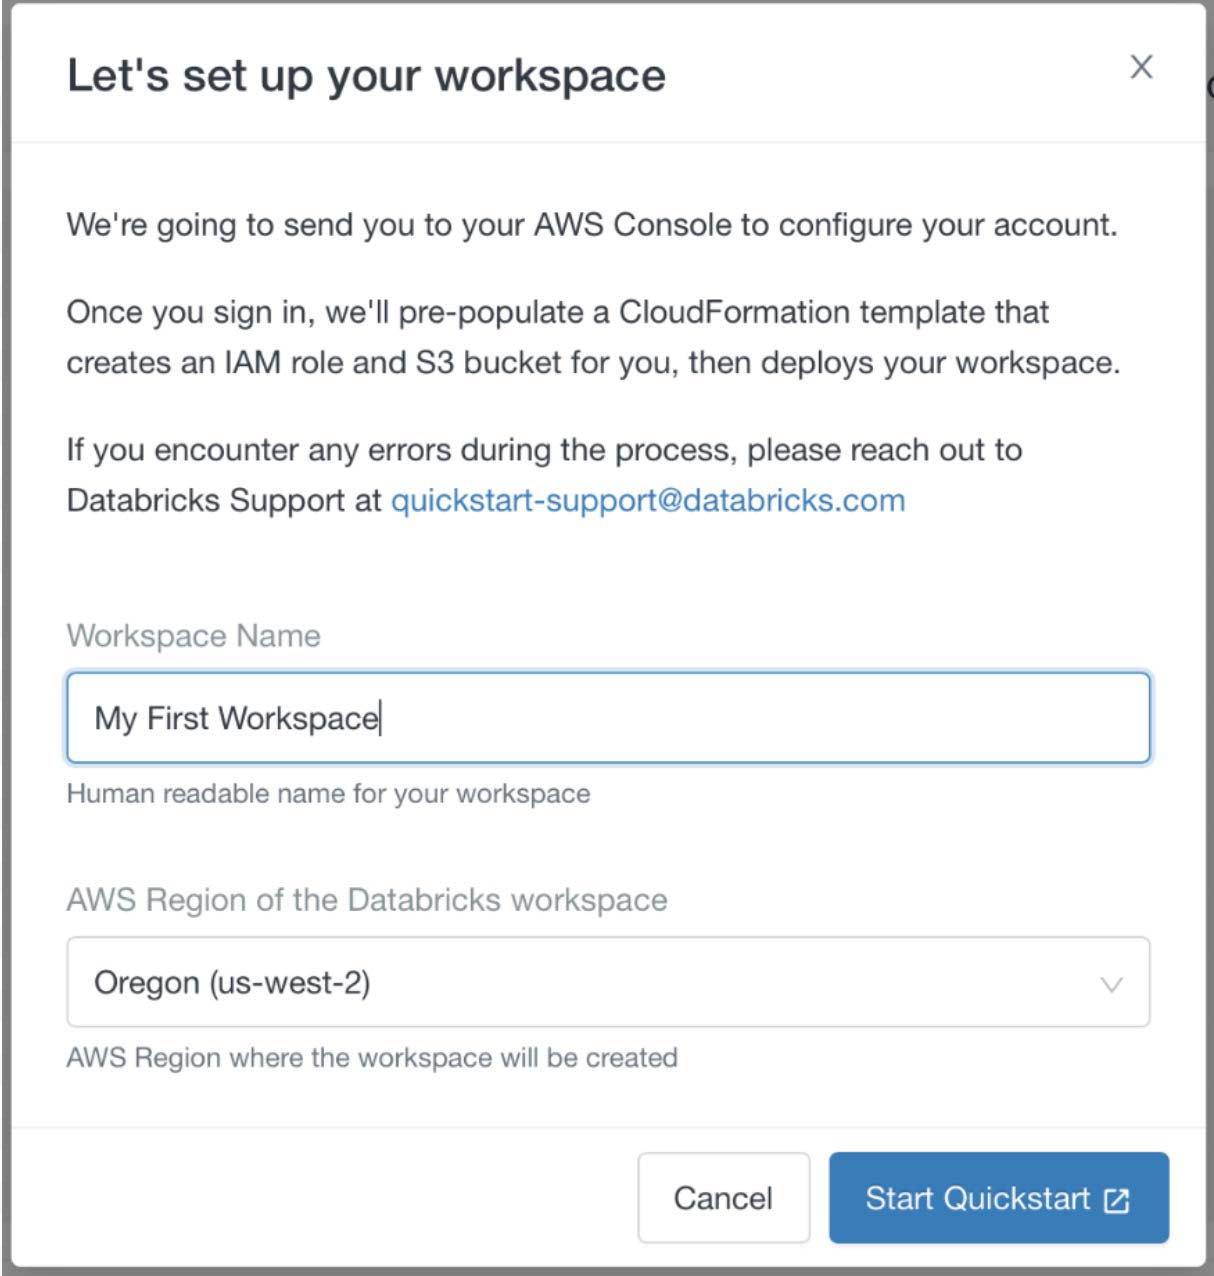 A self-service Quickstart video makes it easy for new signup to spin up their first workspace